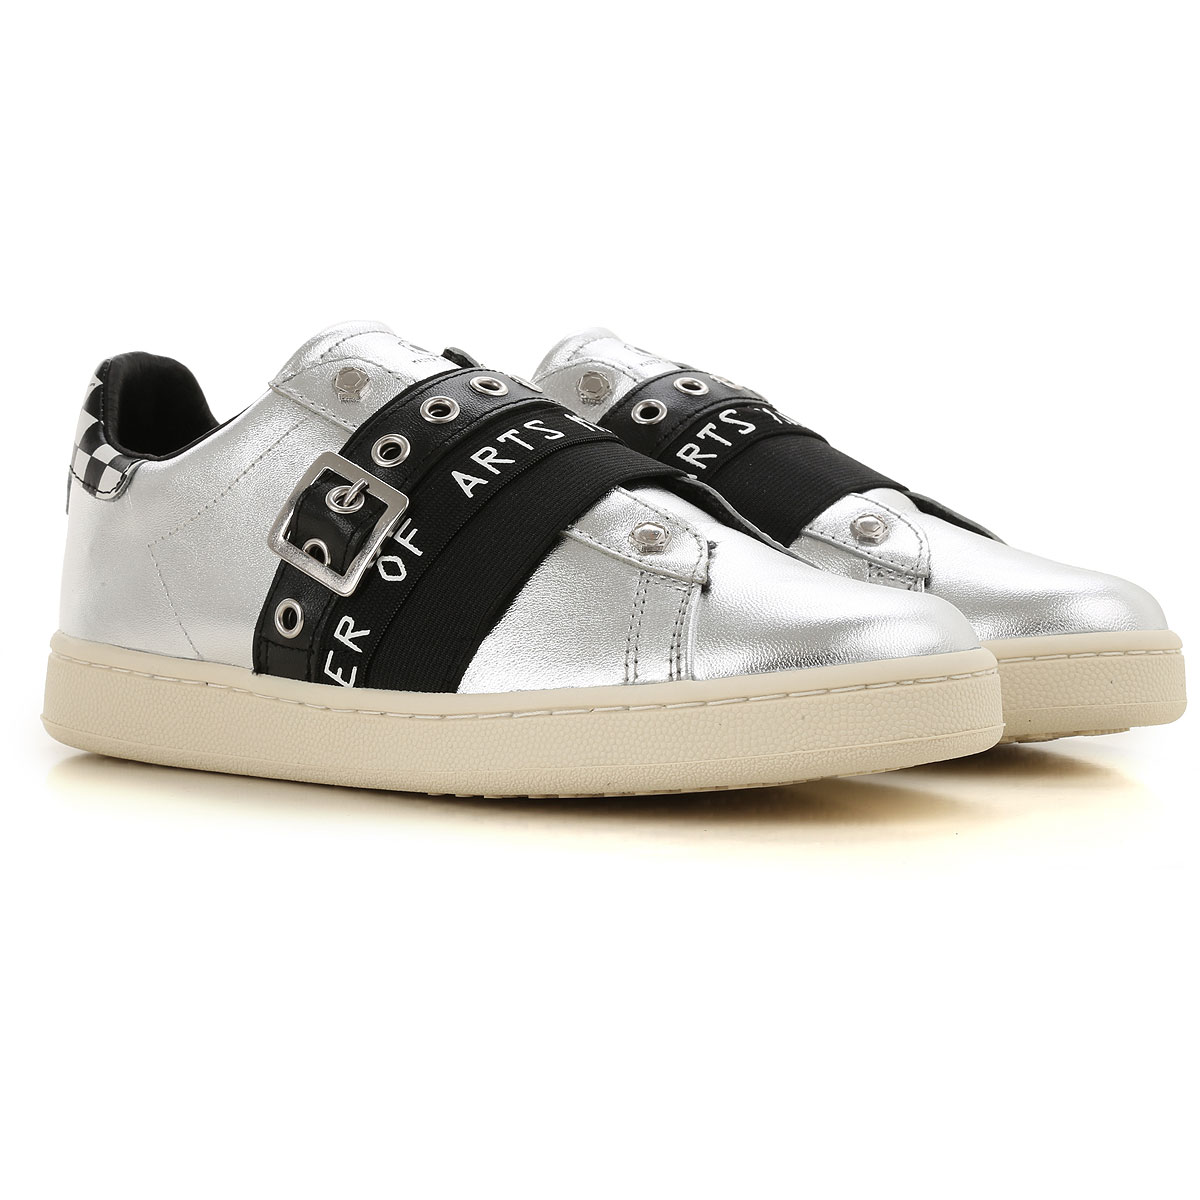 Womens Shoes Moa Master of Arts, Style code: m971-m12e-silver